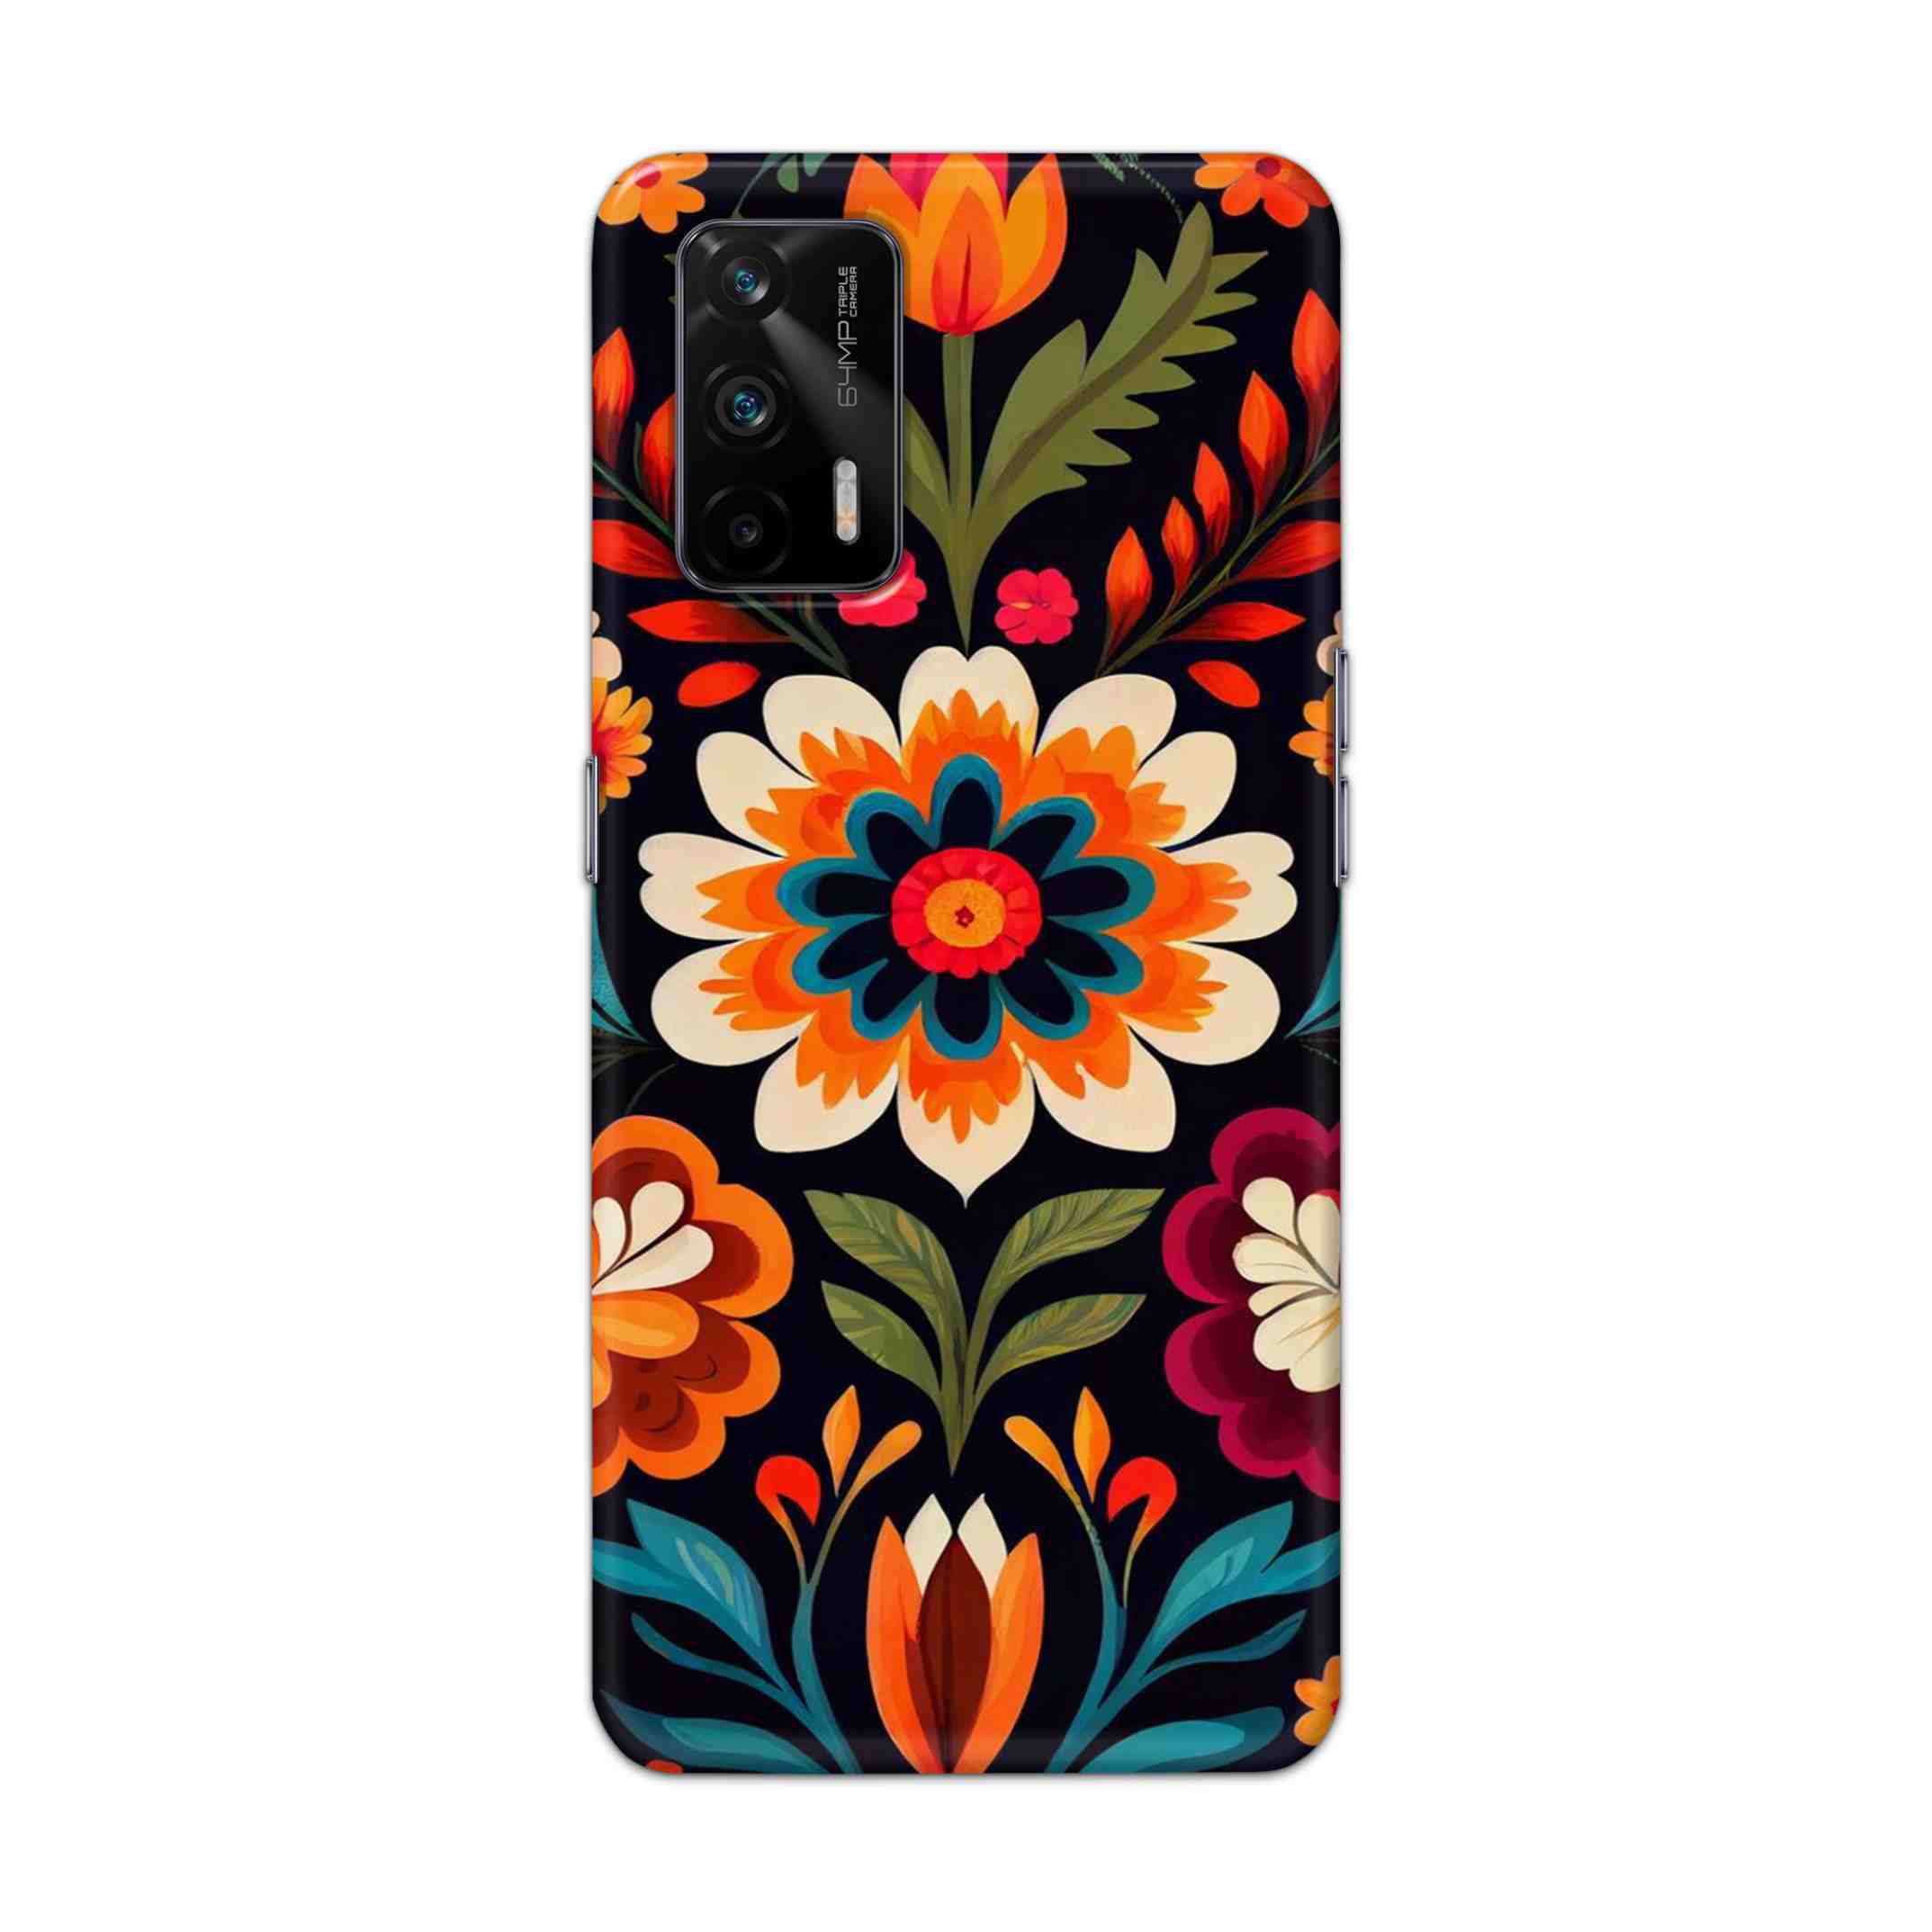 Buy Flower Hard Back Mobile Phone Case Cover For Realme X7 Max Online